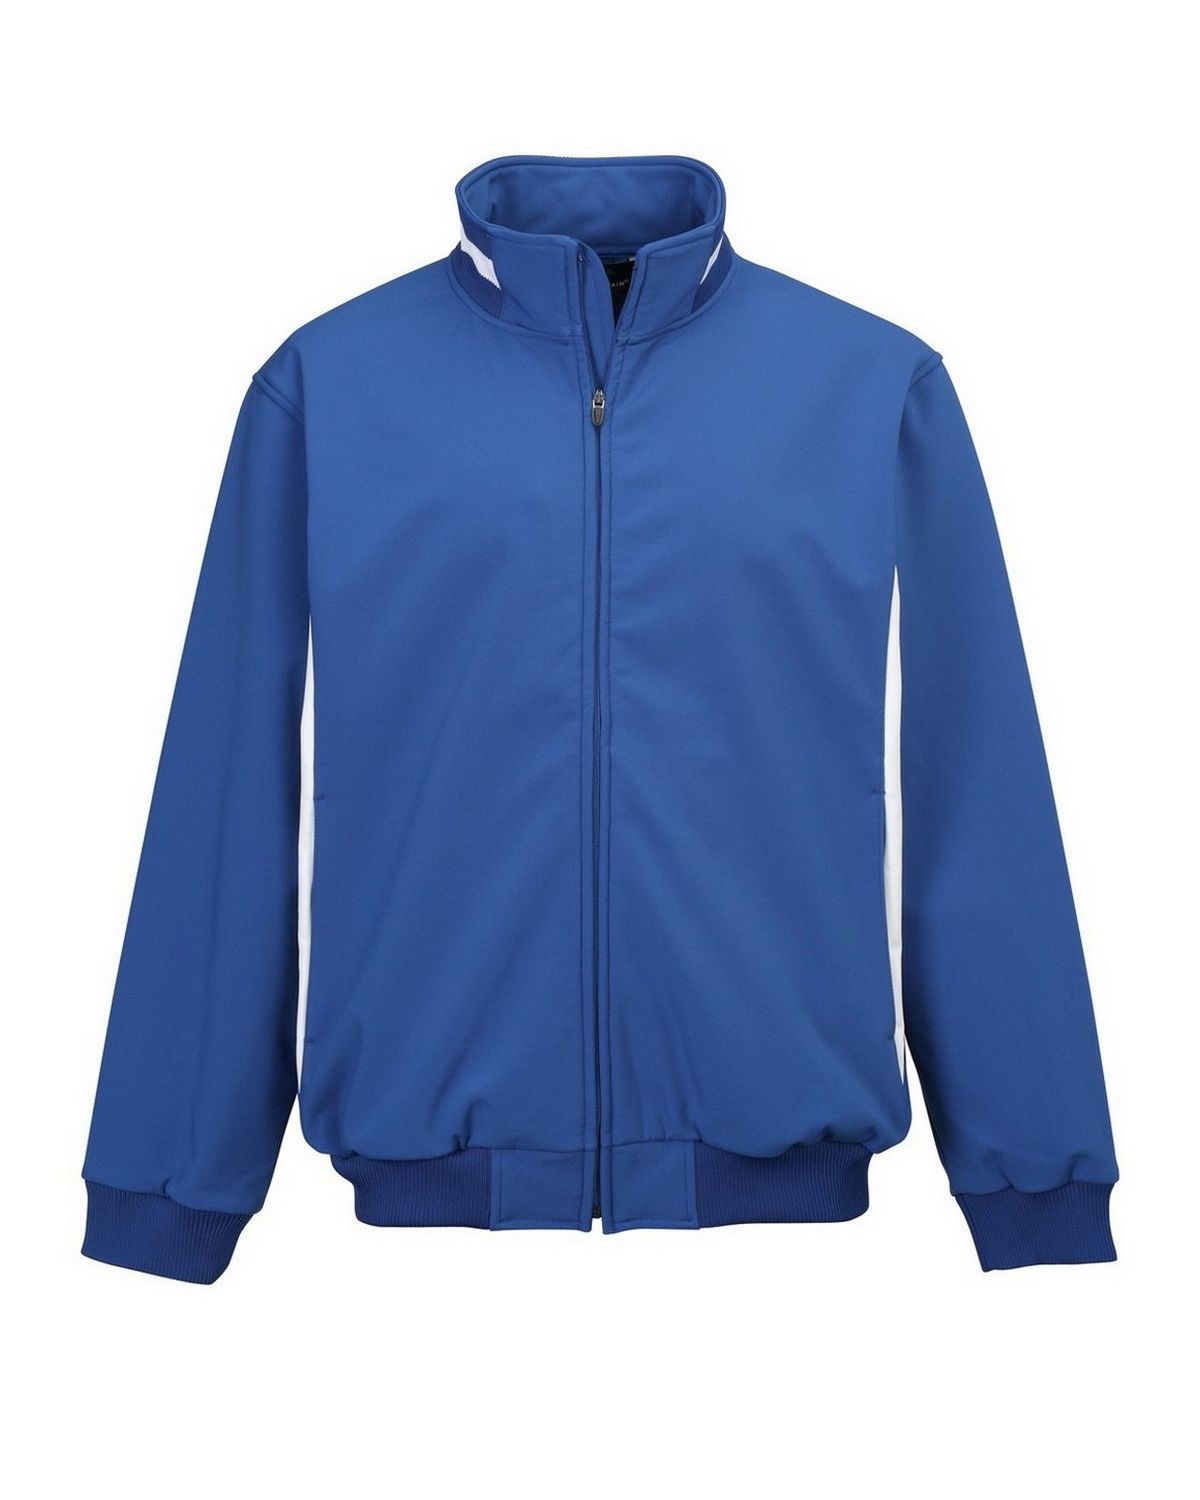 Tri-Mountain 6430 Mens 88% polyester & 12% Spandex bonded stretch woven water resistant Jacket